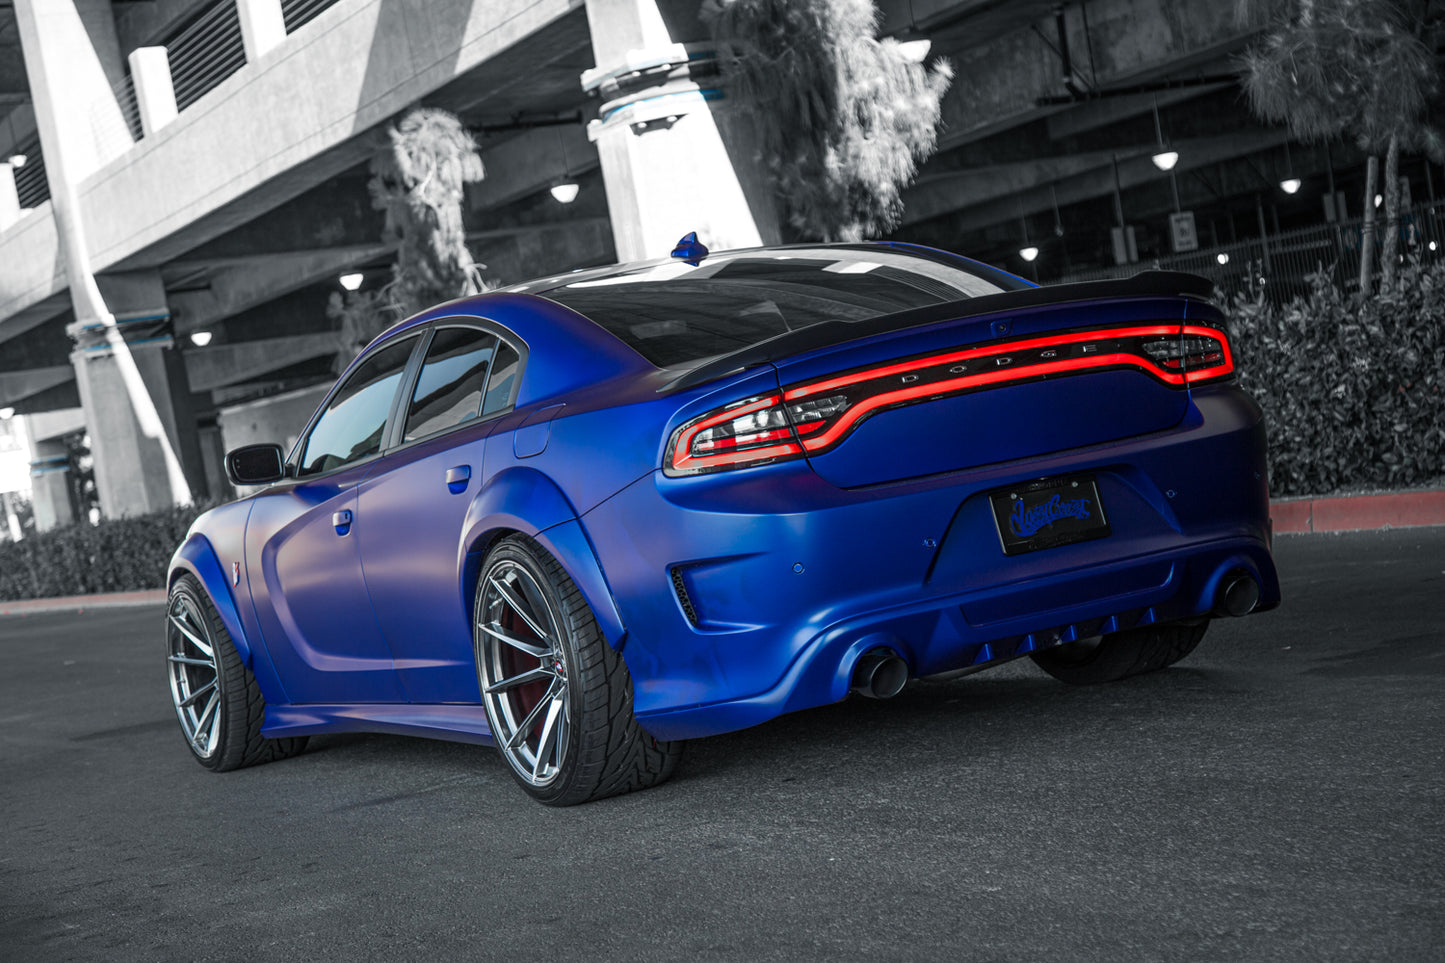 Charger Body Kit